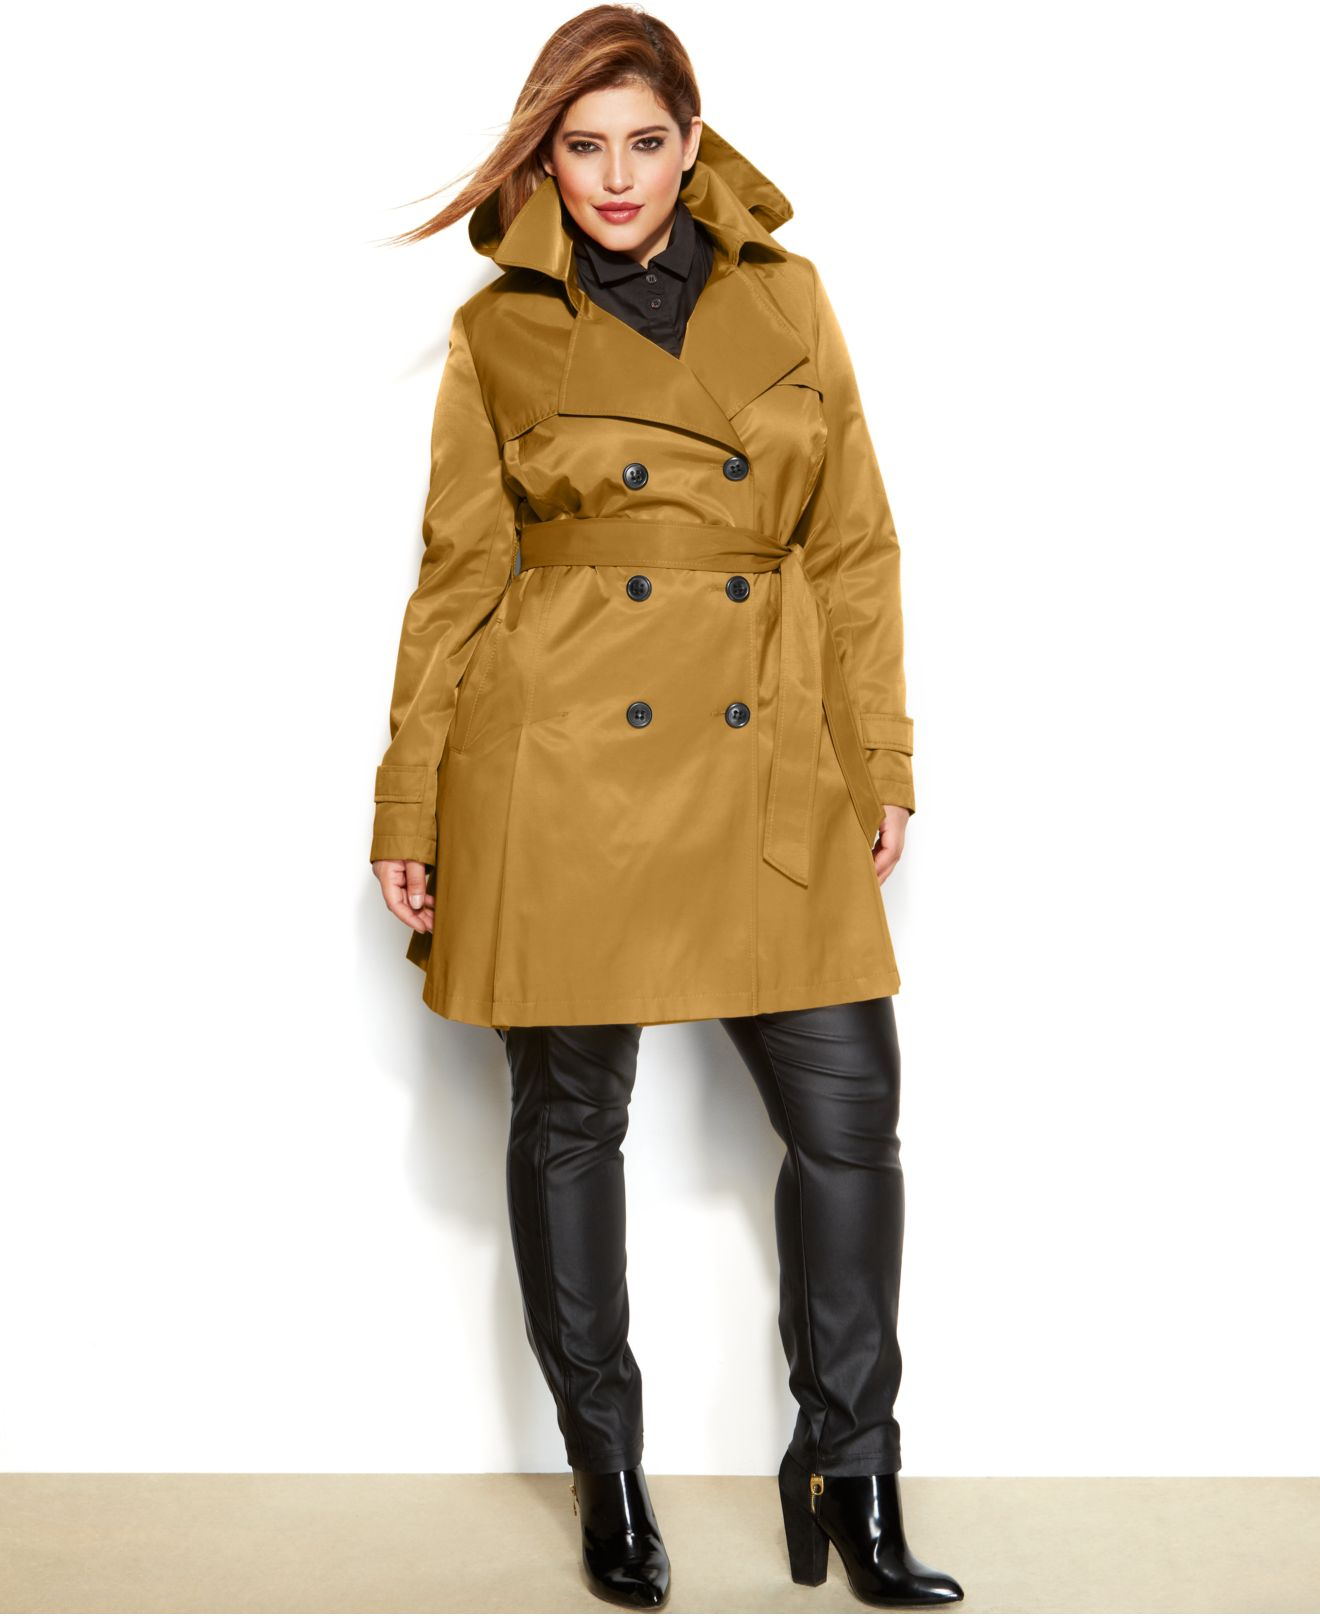 Lyst - Dkny Petite Hooded Trench Raincoat in Yellow